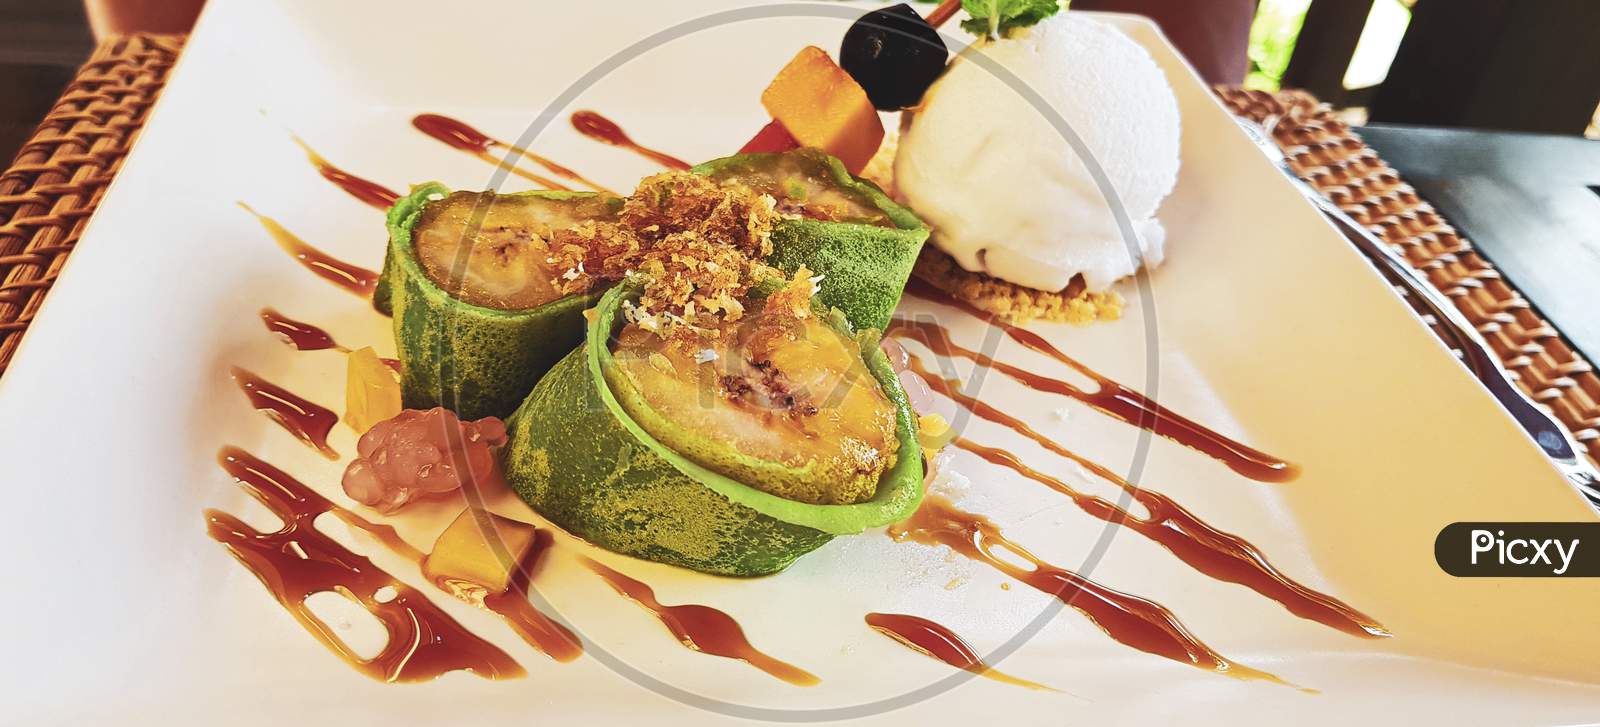 Fried Banana In A Green Pancake. A Scoop Of Ice Cream.